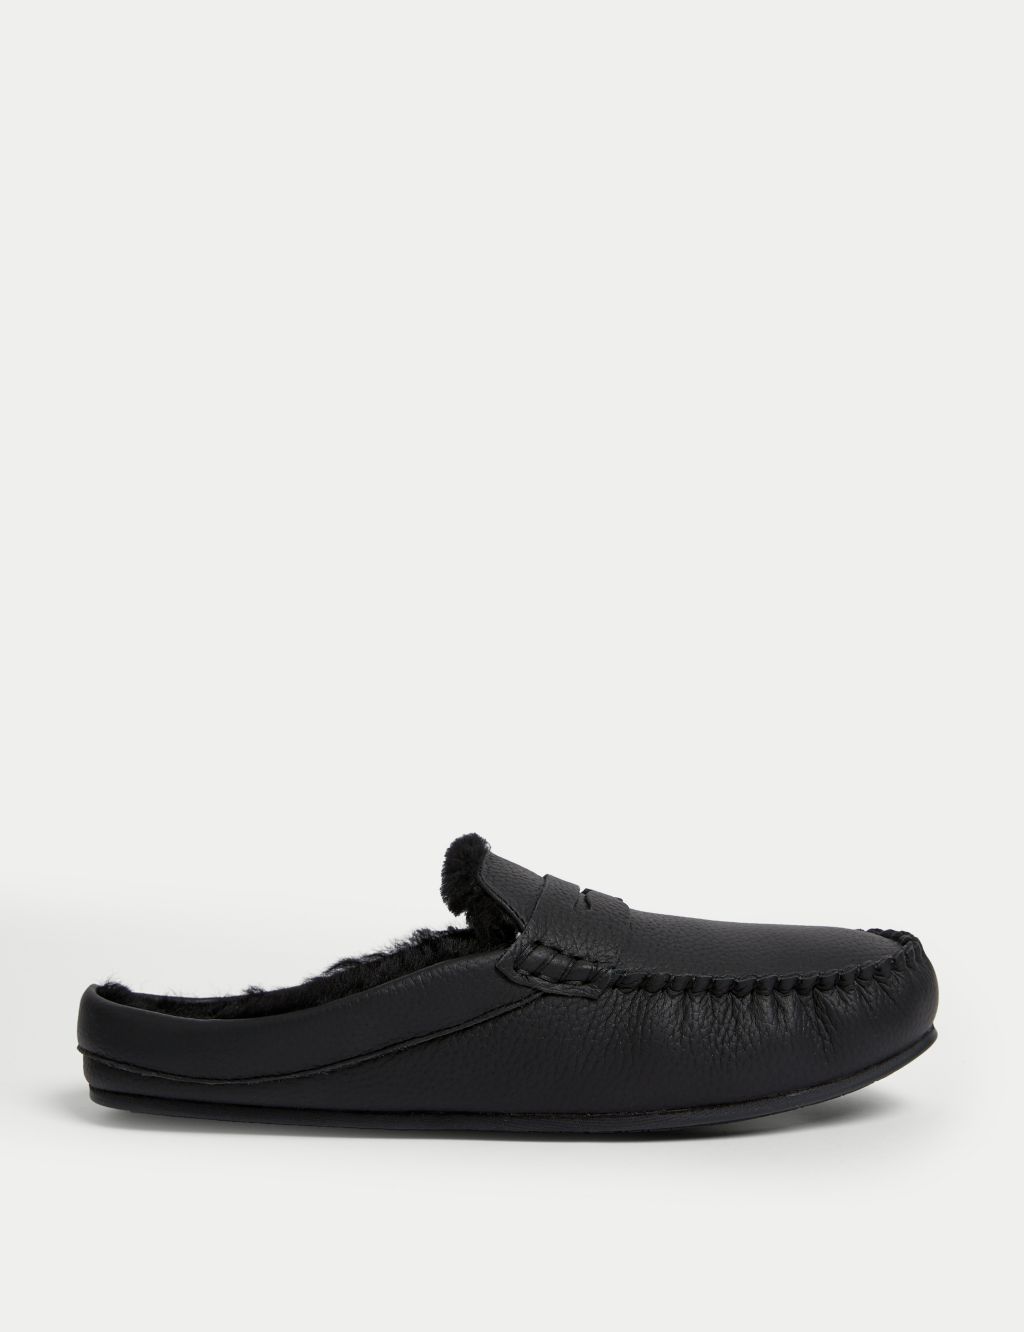 Leather Moccasin Mule Slippers with Freshfeet™ image 1